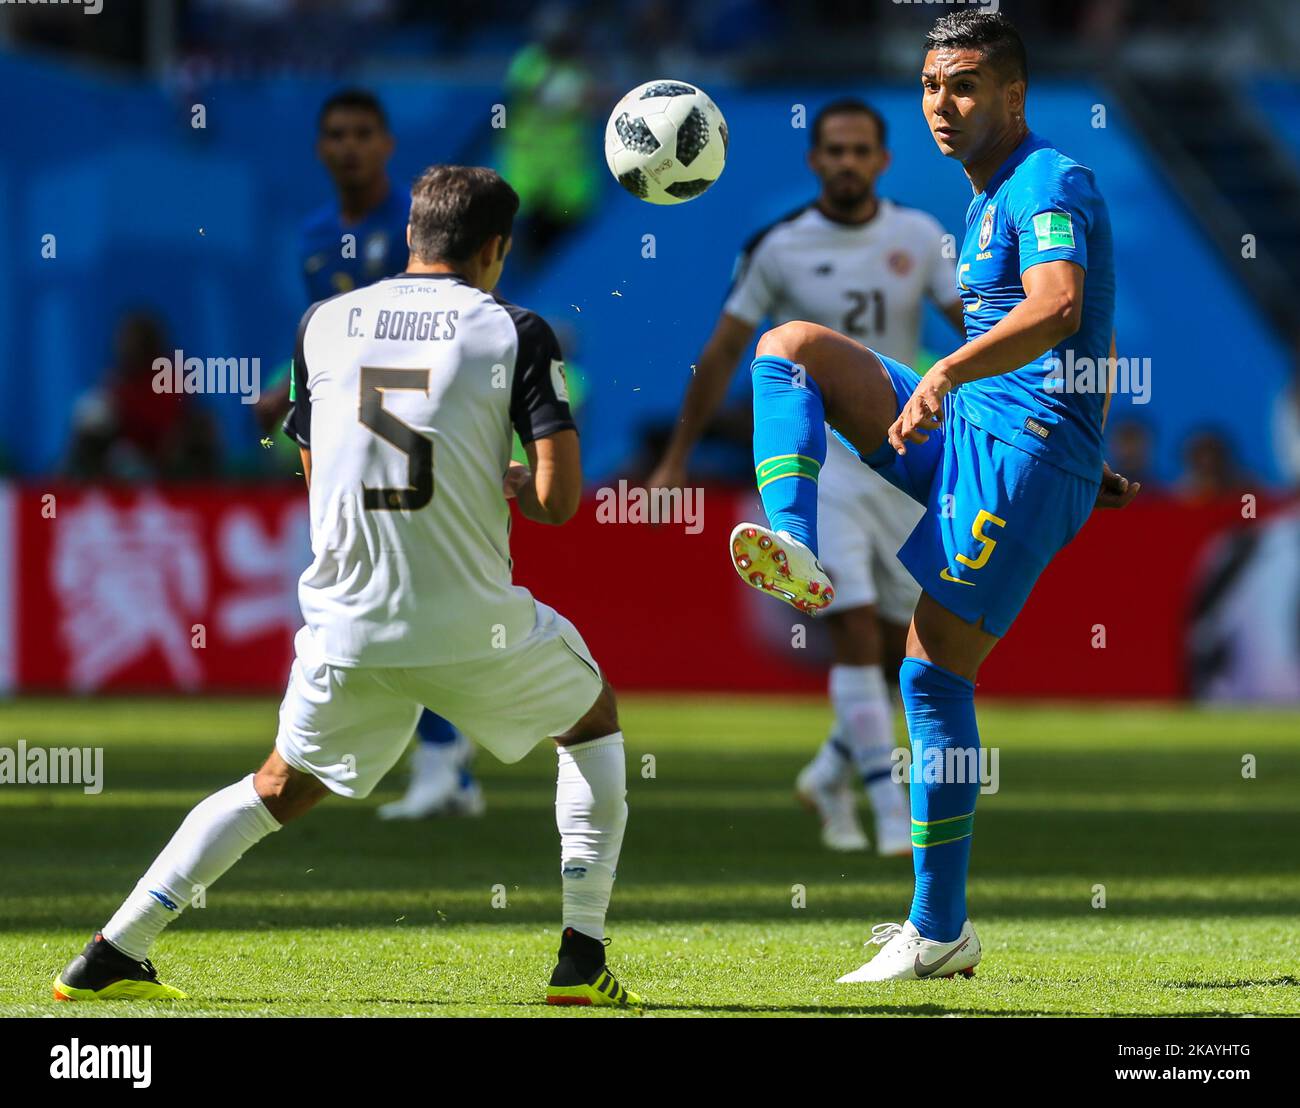 Celso Borges (L) of the Costa Rica national football team and Casemiro of the Brazil national football team vie for the ball during the 2018 FIFA World Cup match, first stage - Group E between Brazil and Costa Rica at Saint Petersburg Stadium on June 22, 2018 in St. Petersburg, Russia. (Photo by Igor Russak/NurPhoto) Stock Photo